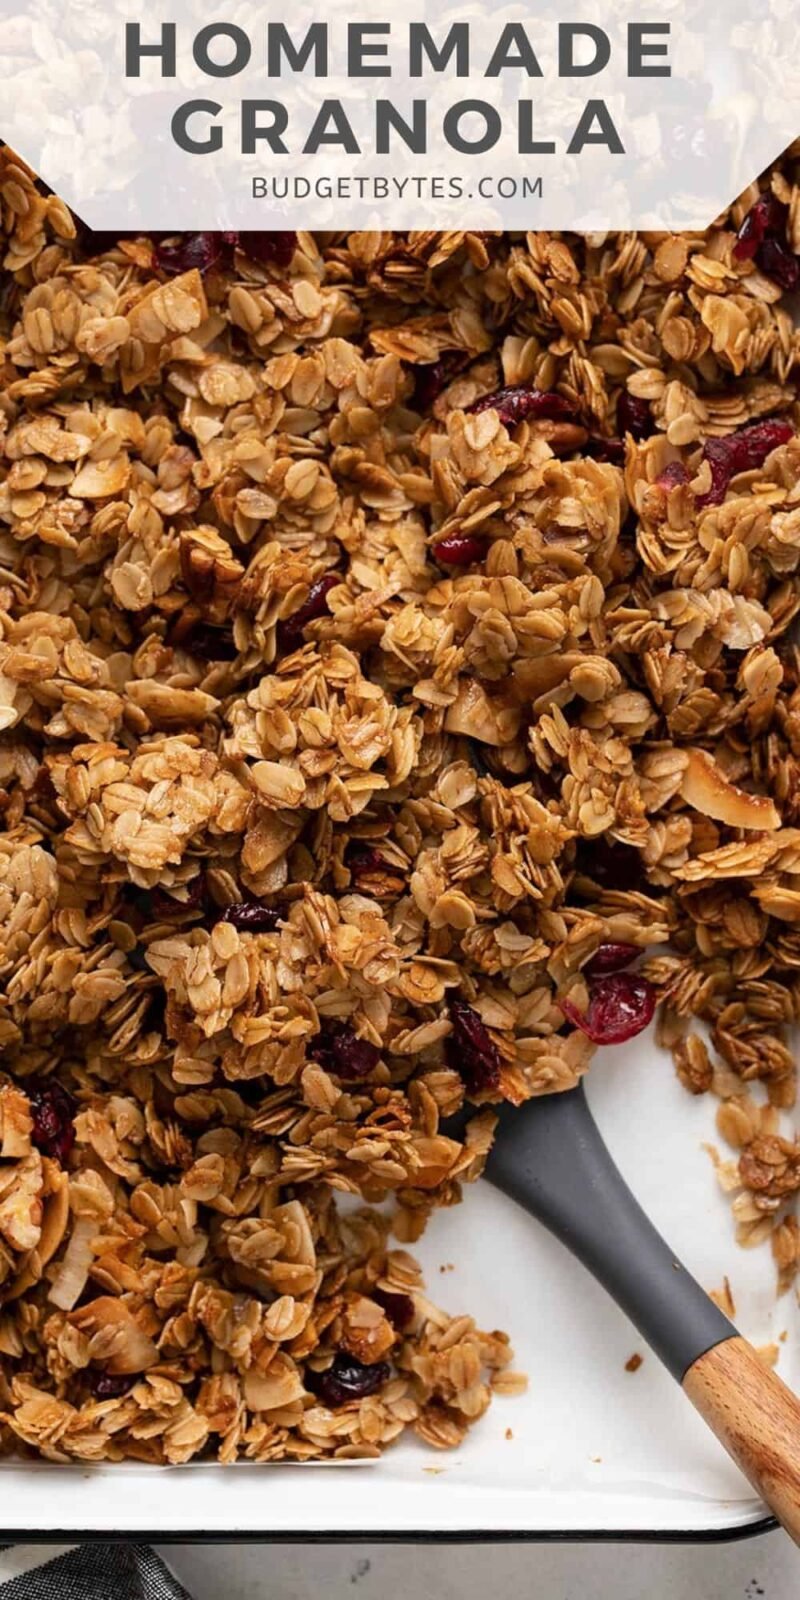 Overhead view of a sheet pan full of granola with a spatula.